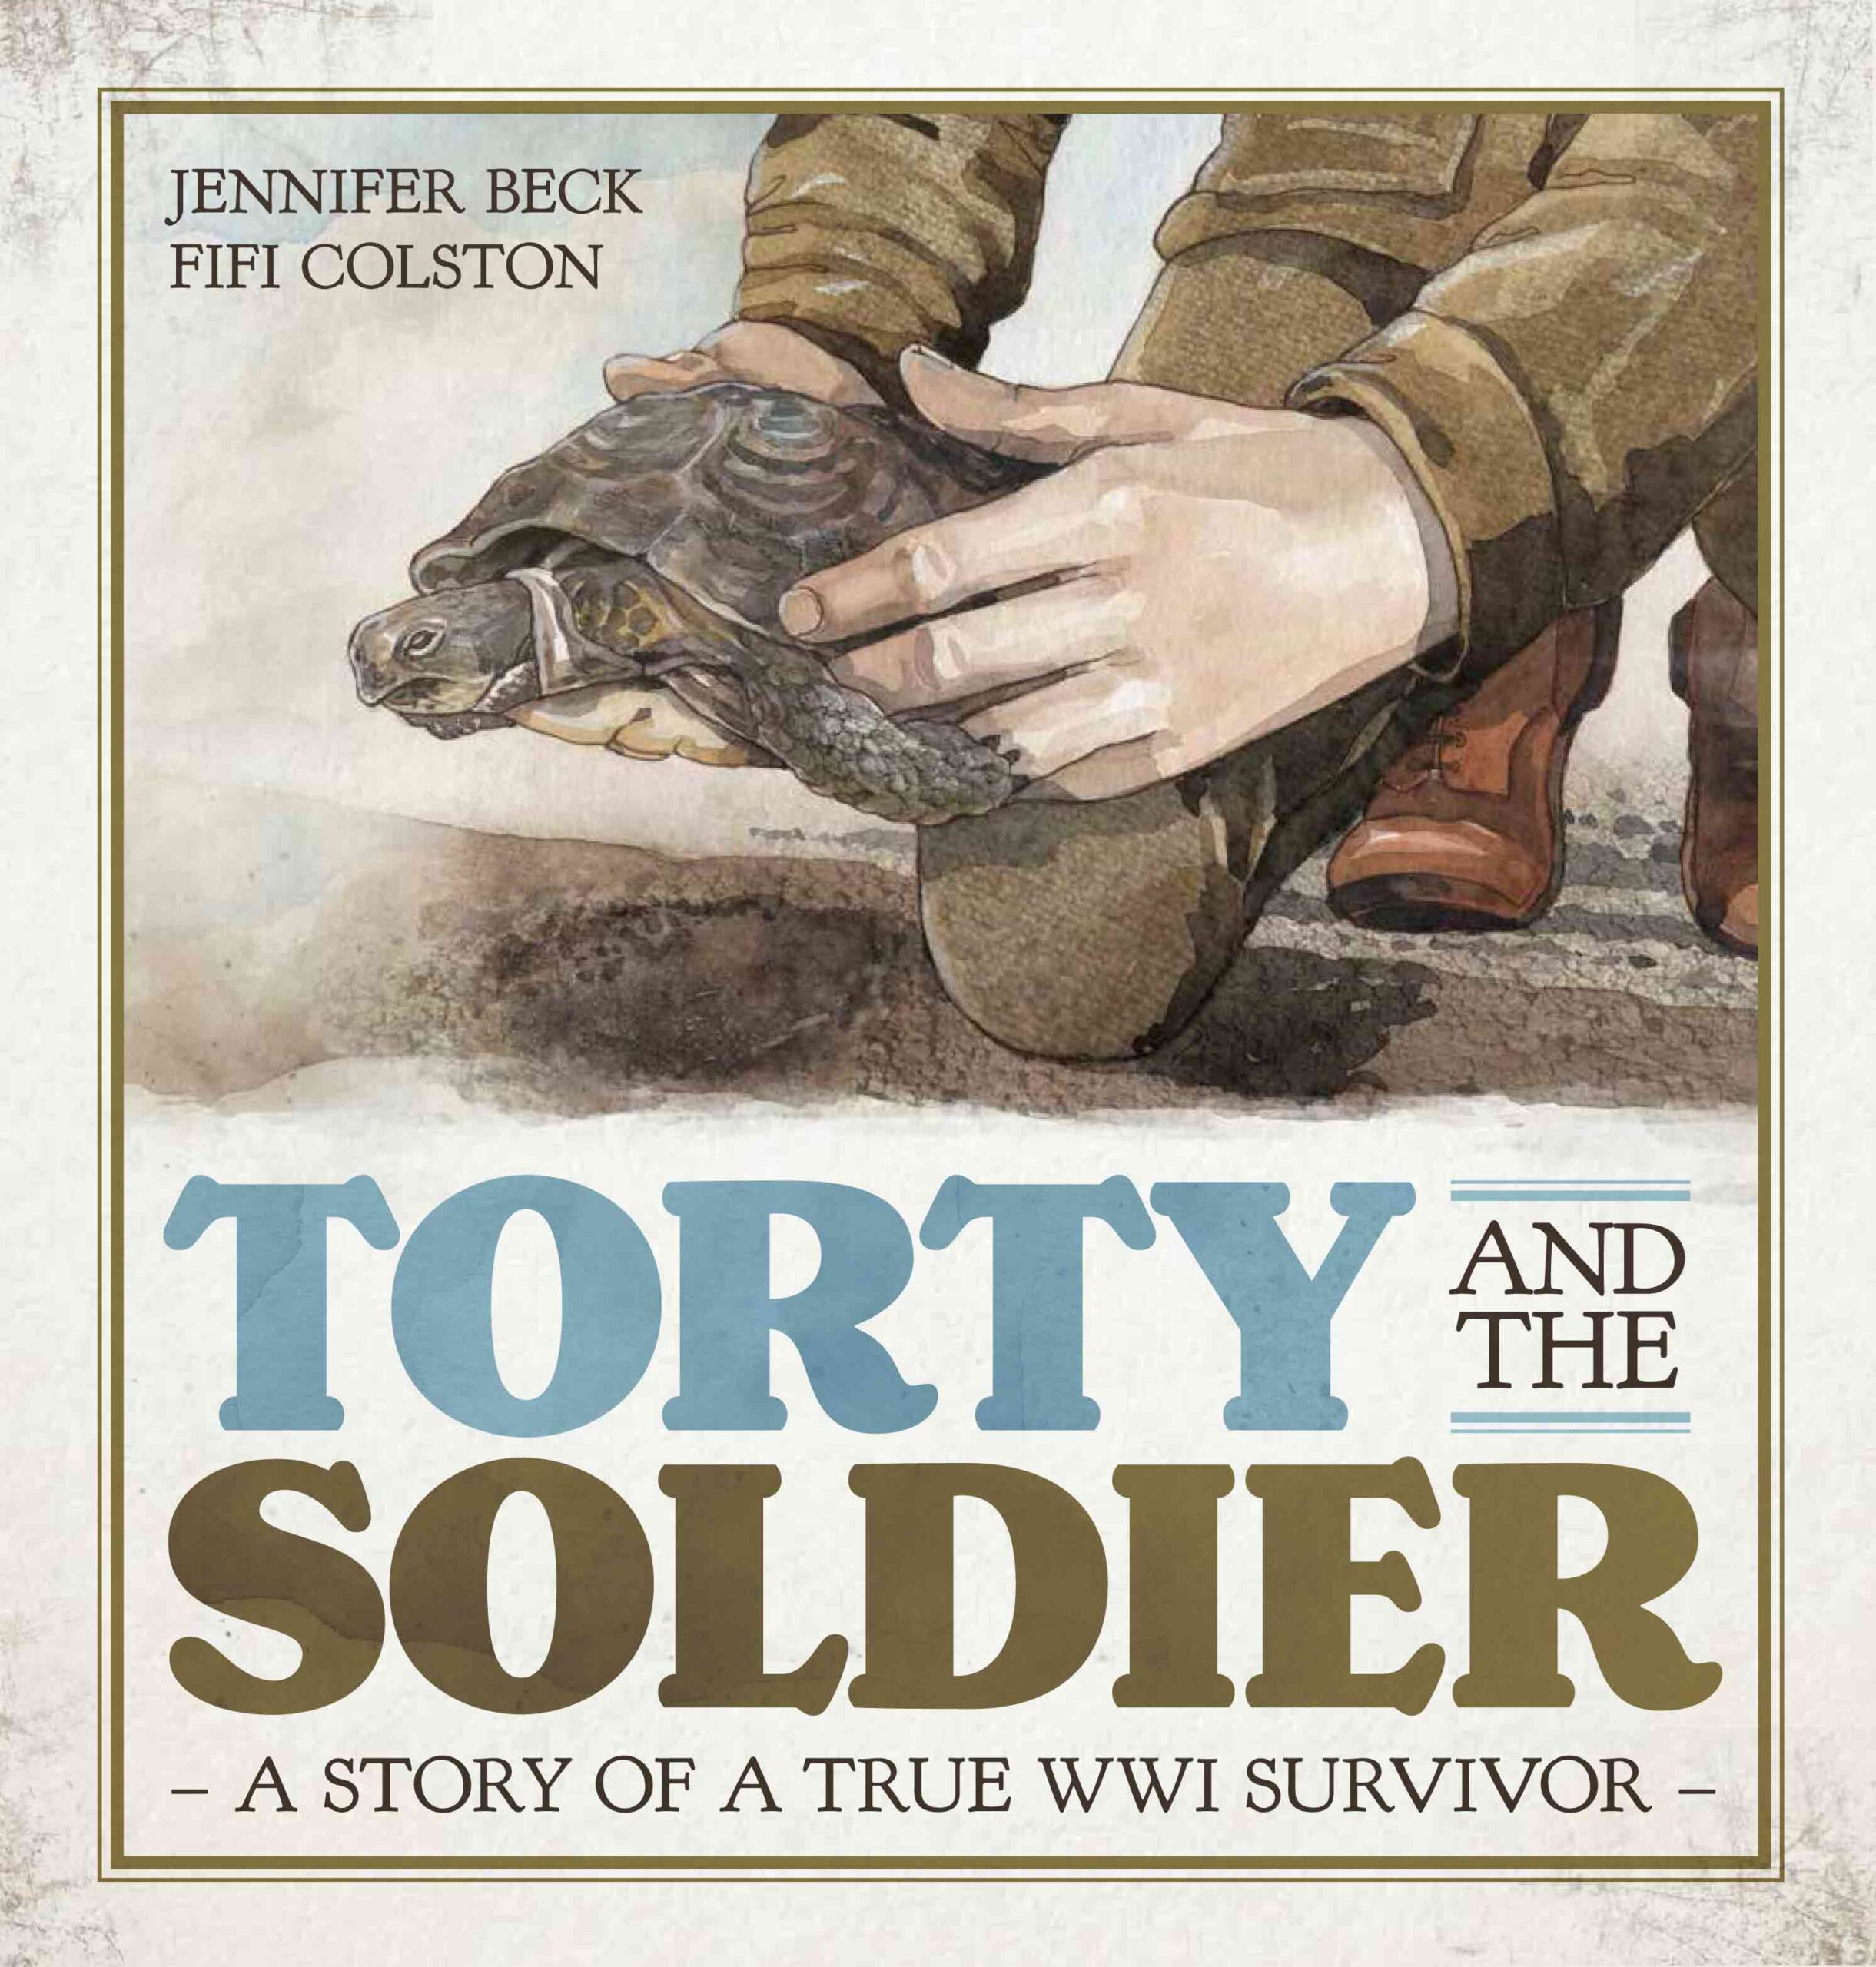 Torty and the Soldier: Image of the cover of the book “Torty and the Soldier”.